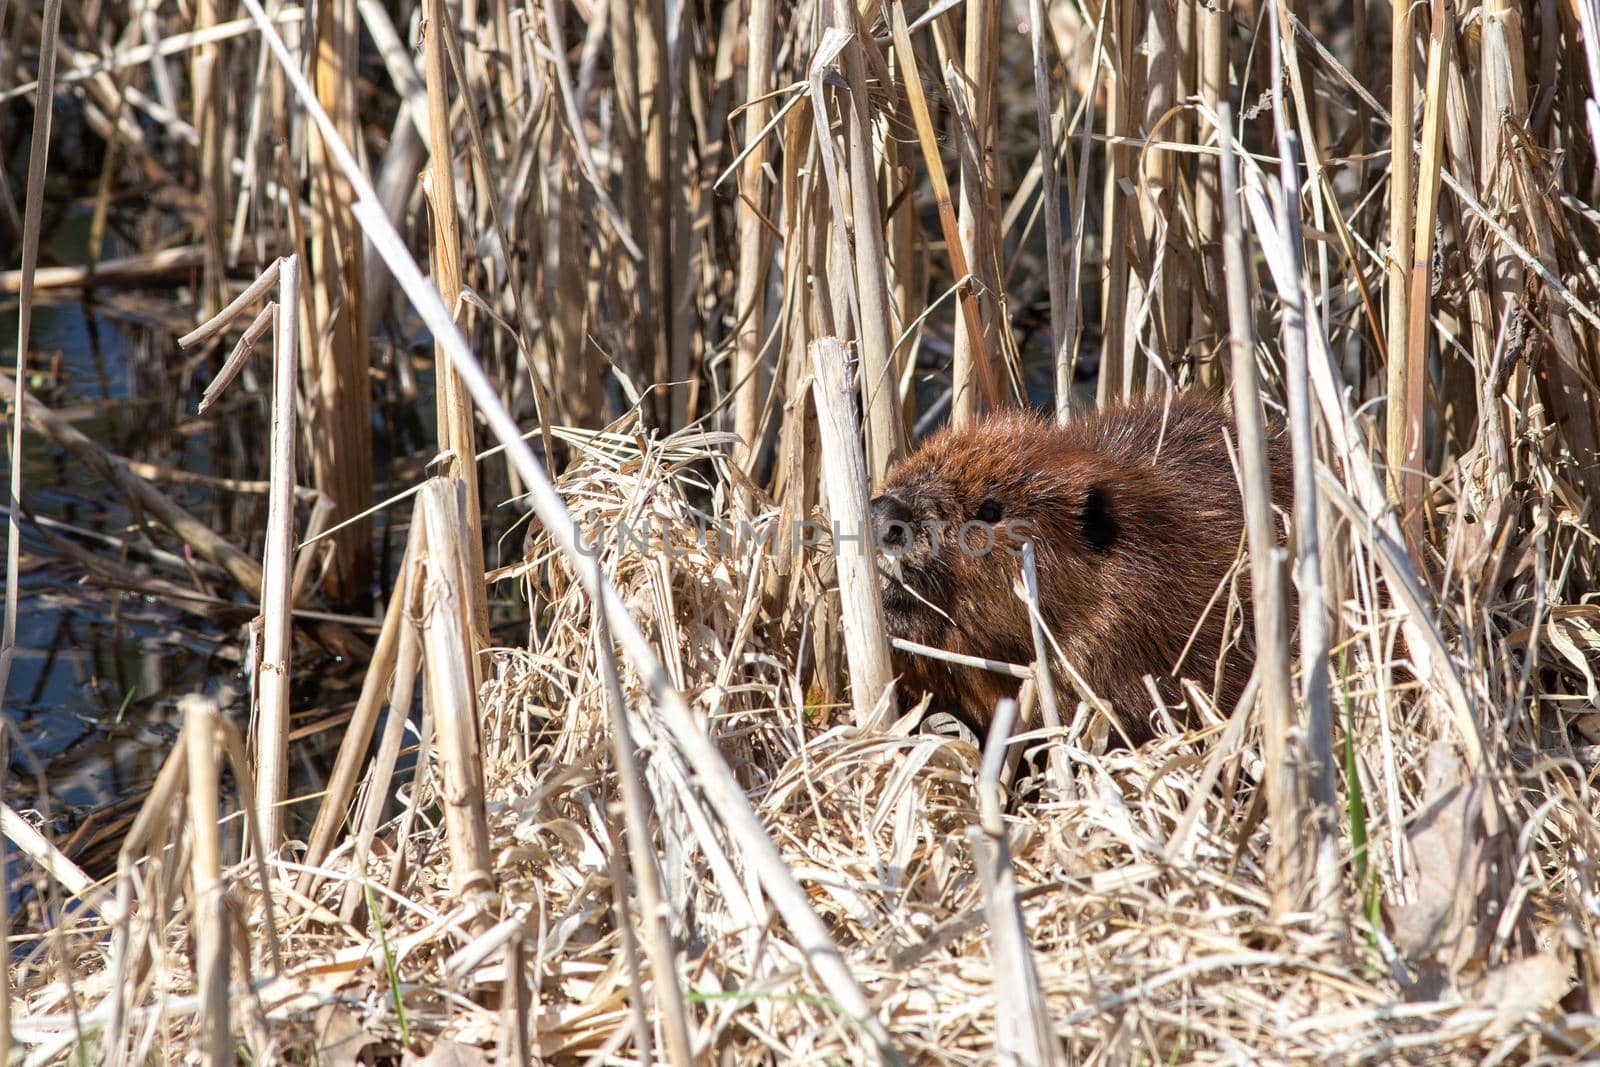 Beaver hiding in dry reeds beside pond by colintemple